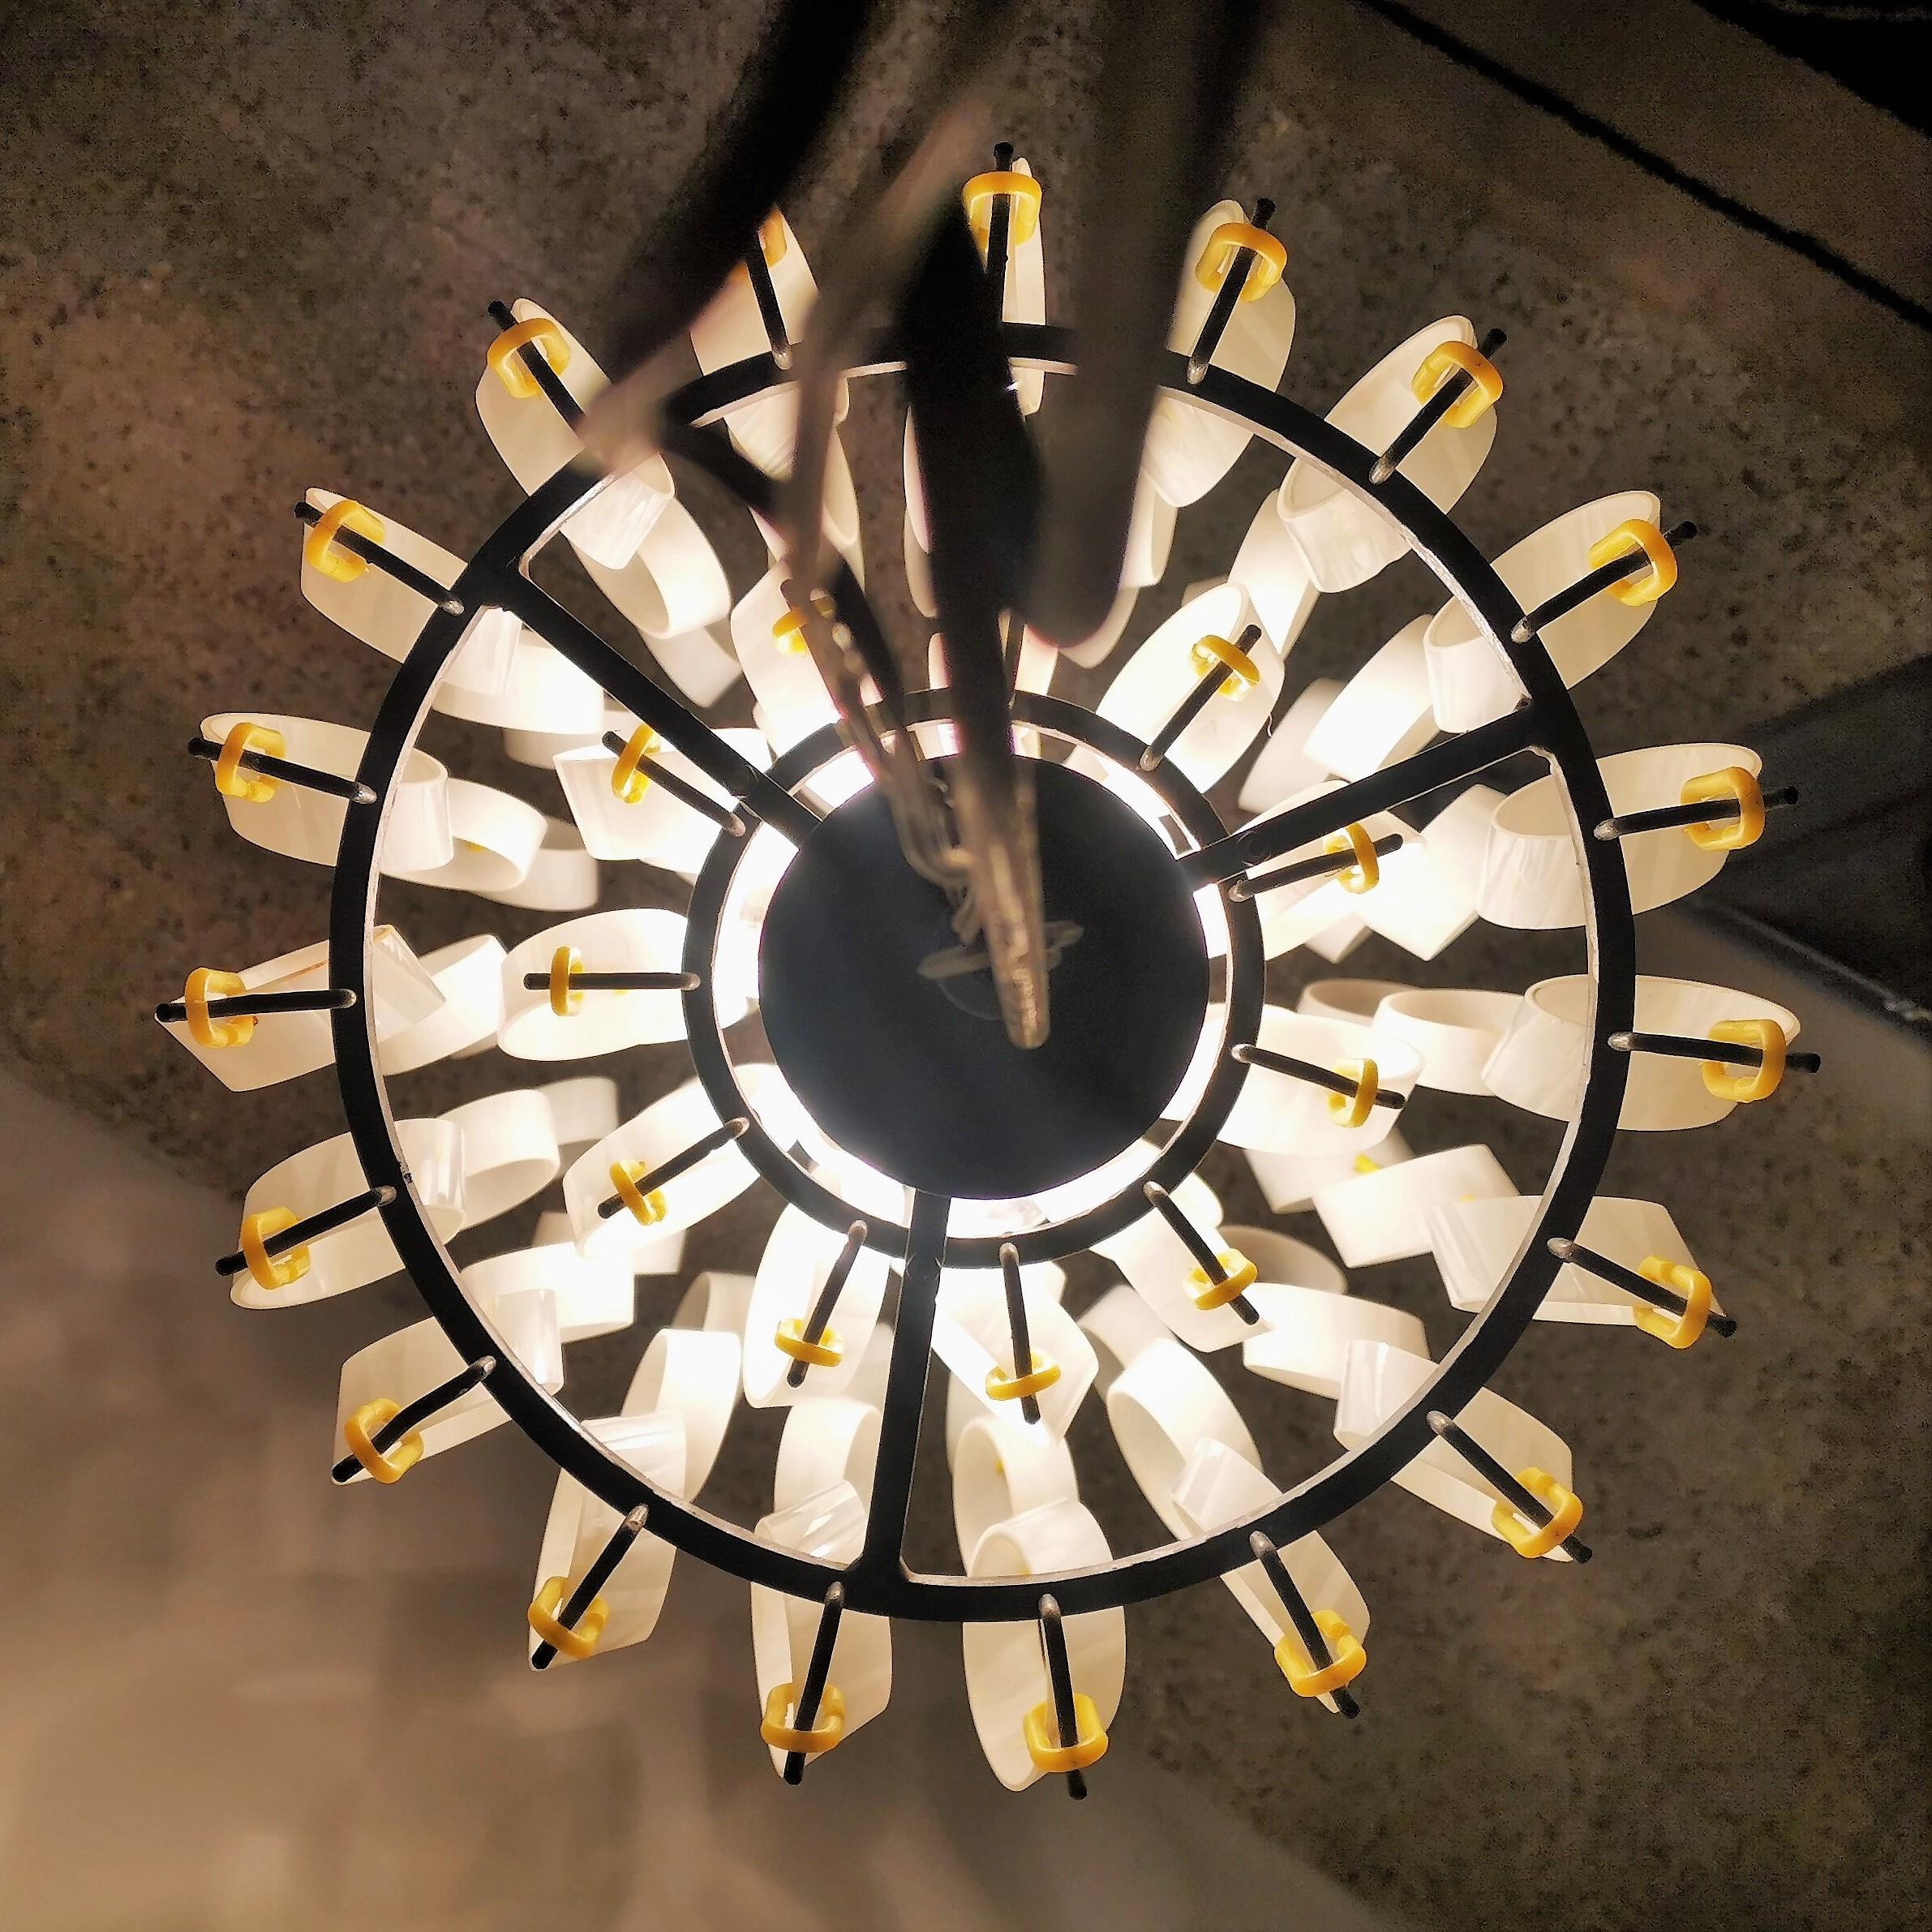 Mid-Century Vistosi Glass Chandelier Made of Modular Elements 1960s Italy For Sale 9